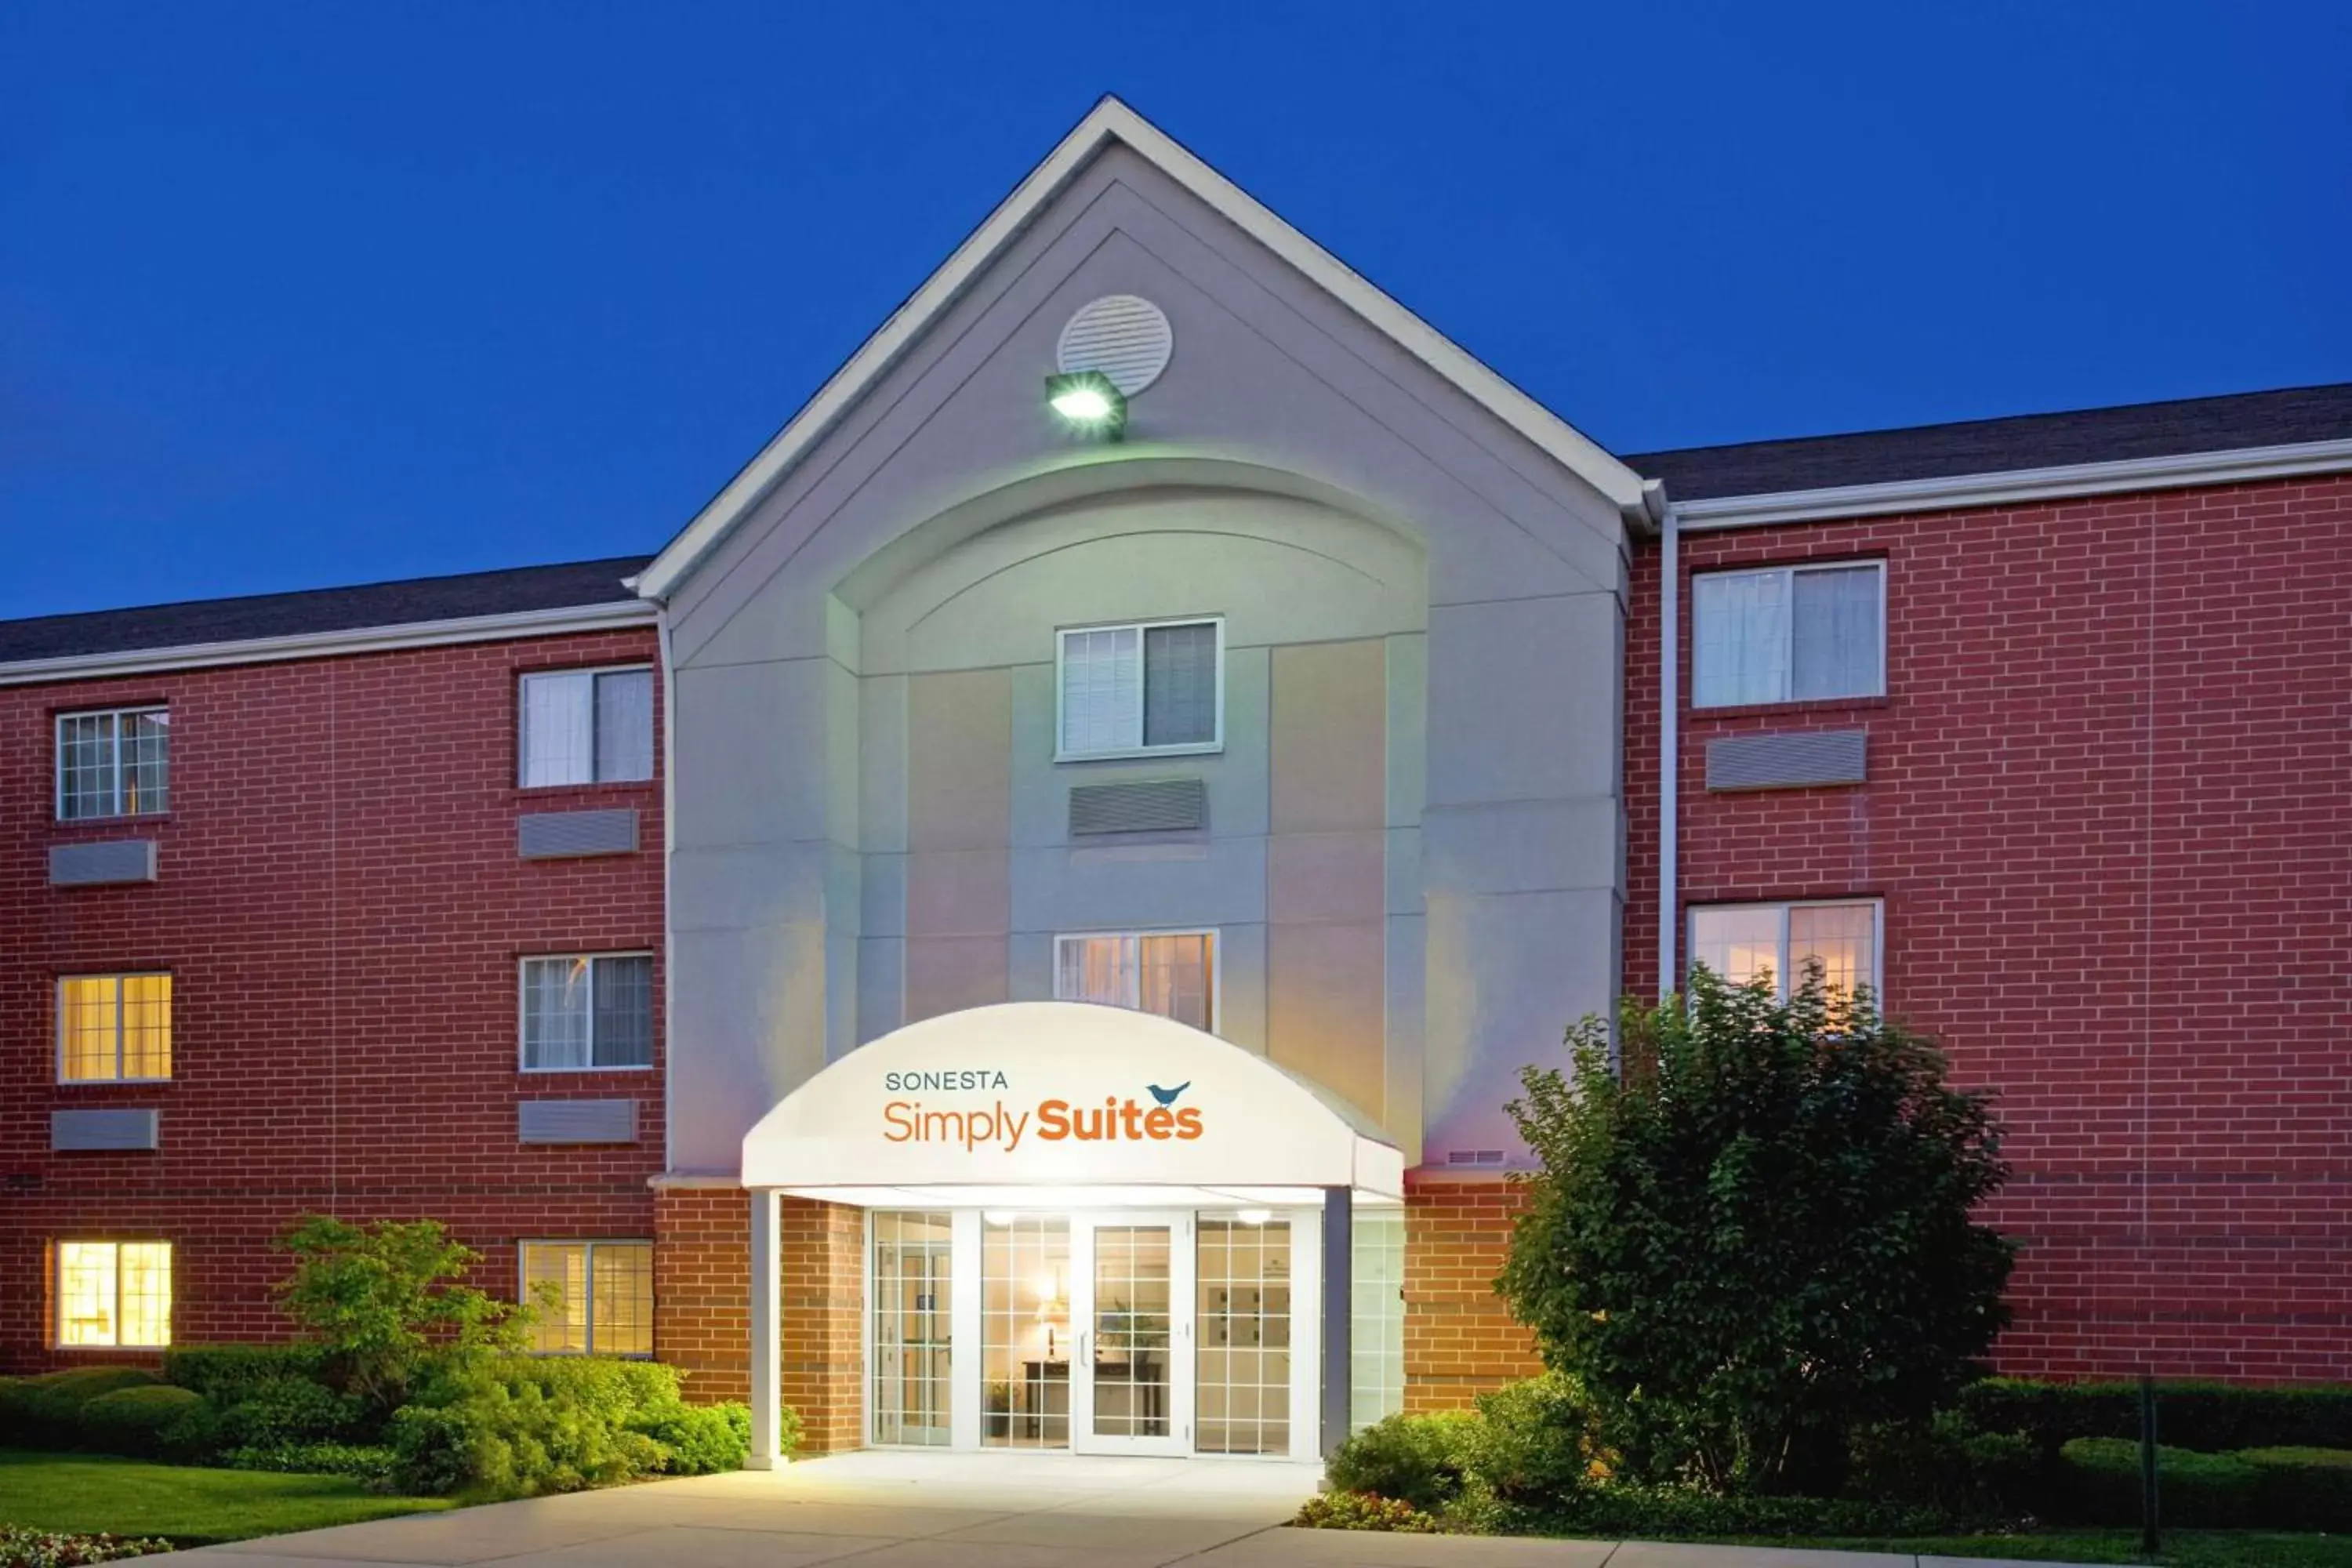 Property building in Sonesta Simply Suites Chicago Naperville